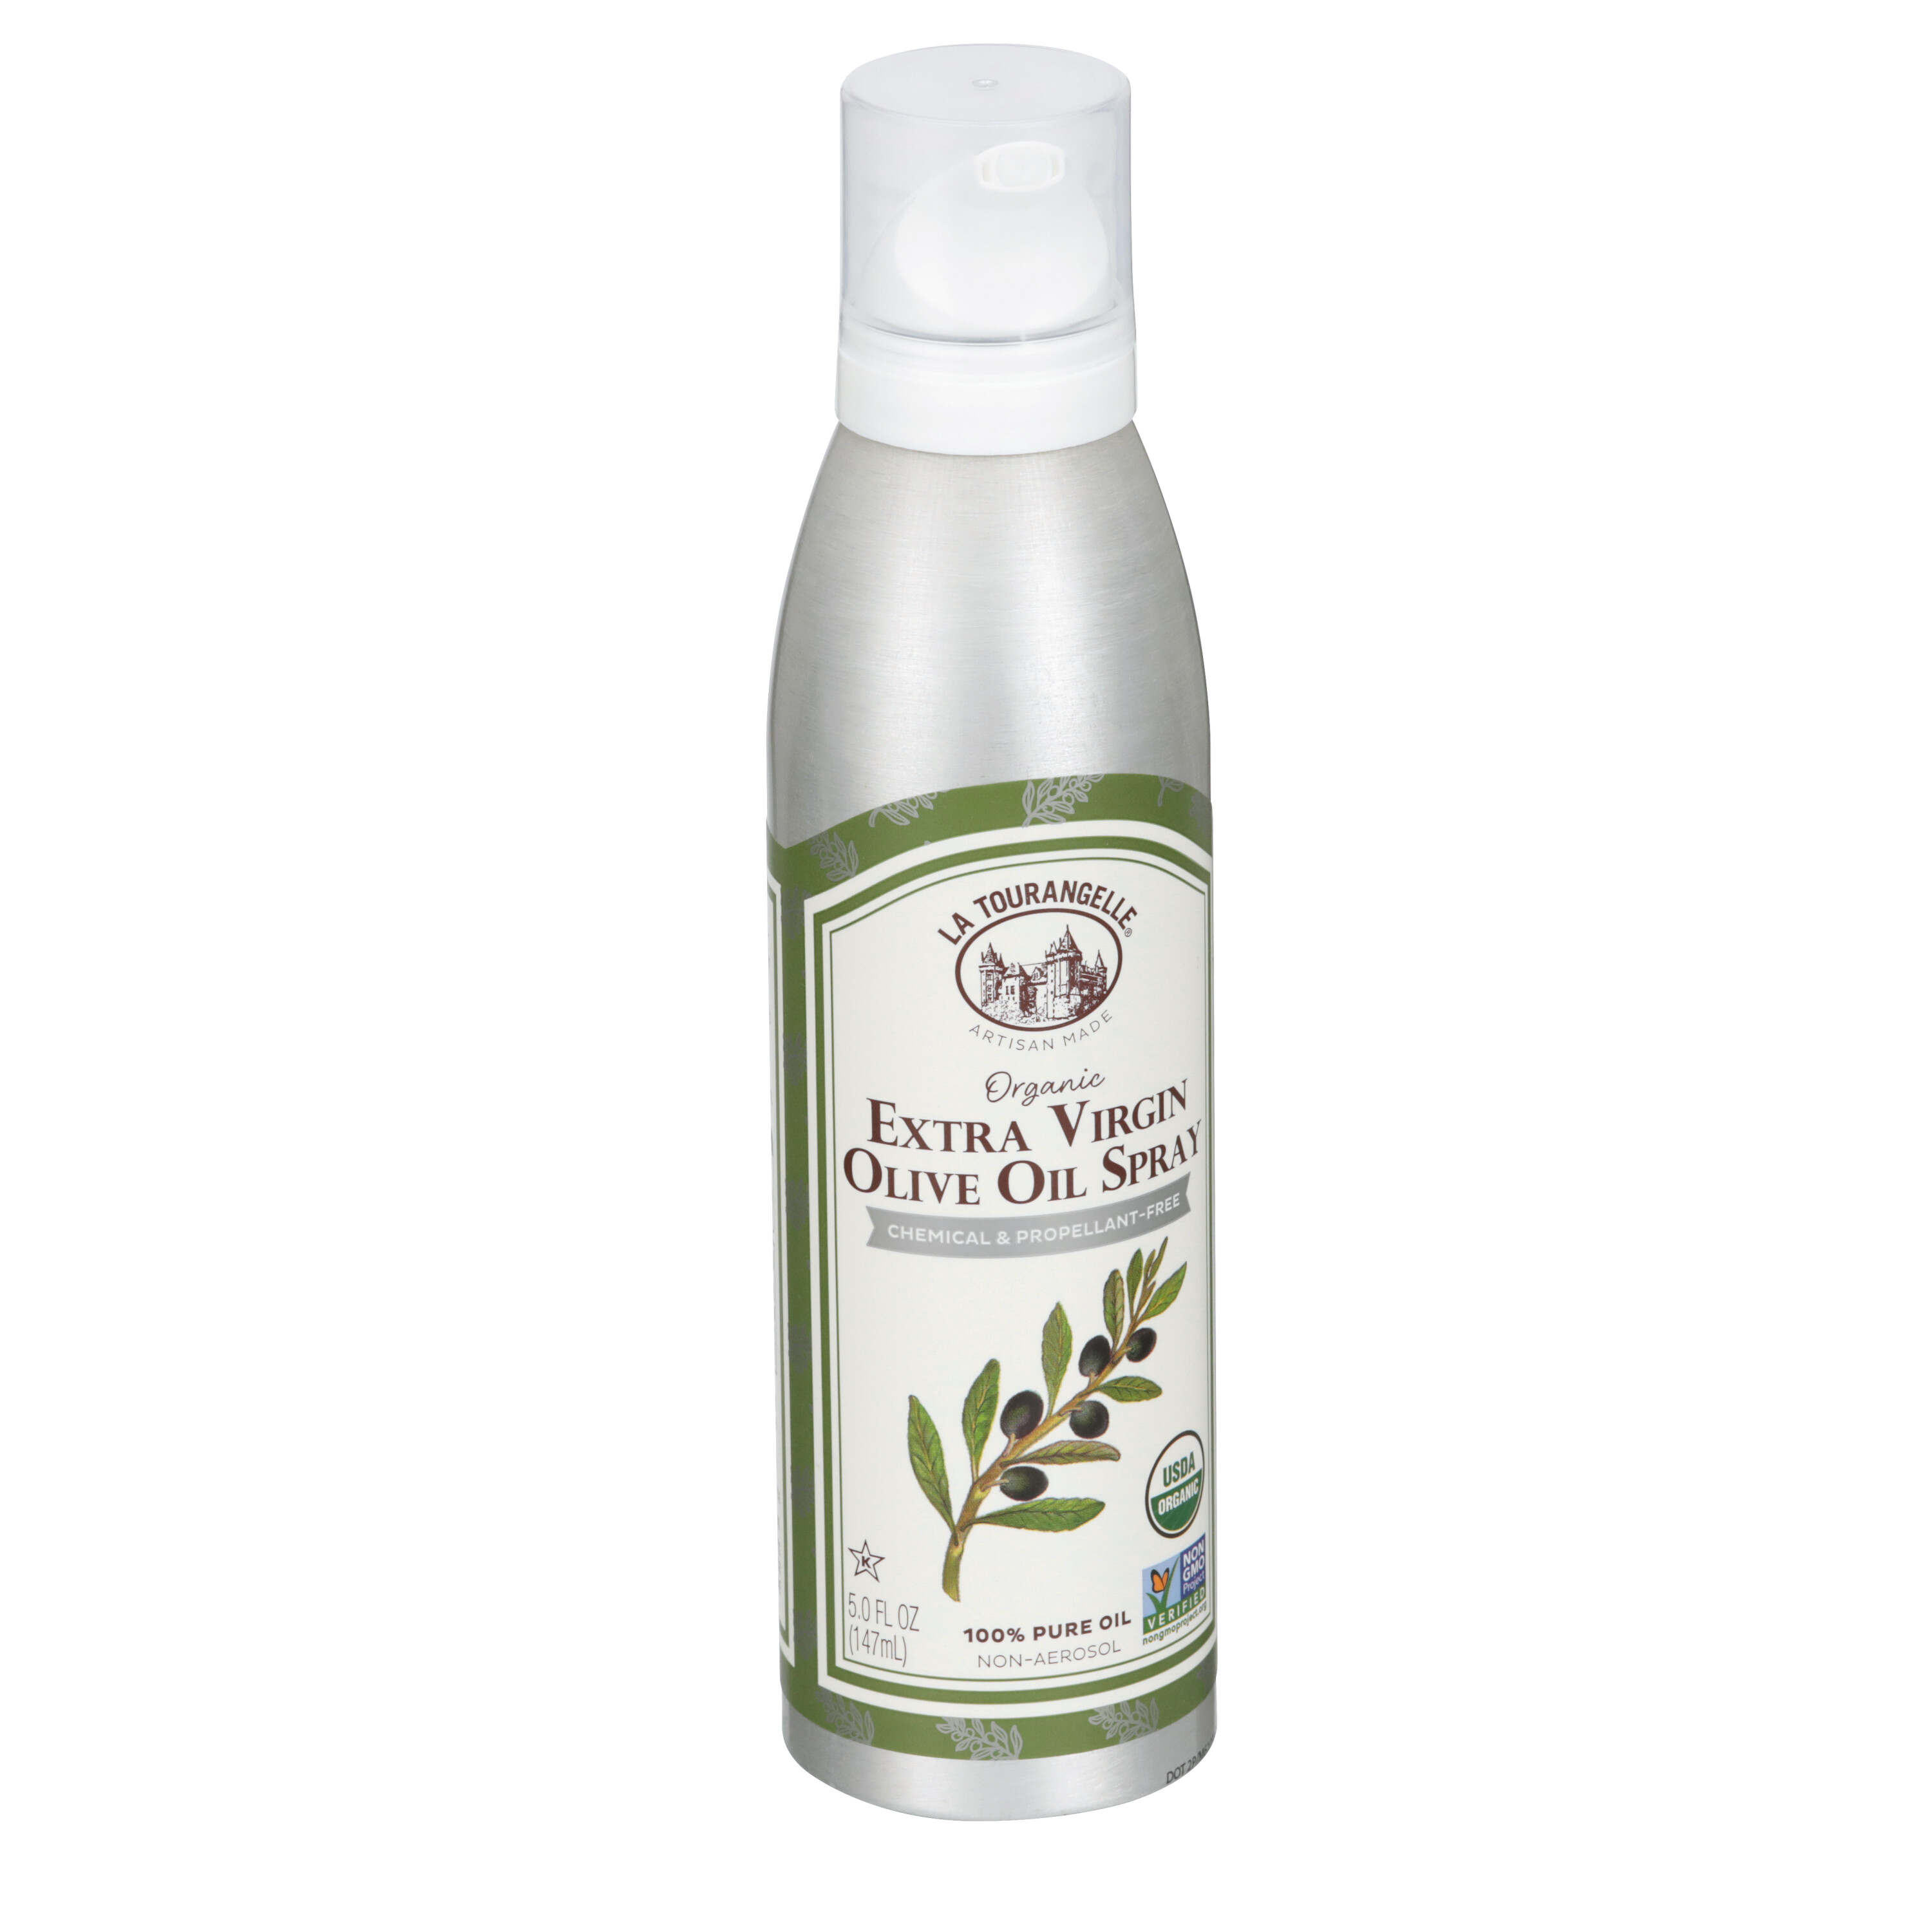 La Tourangelle Extra Virgin Olive Oil Spray, Cold-Pressed Extra Virgin,  All-Natural, Artisanal, Great for Cooking, Sauteing, Grilling, and  Dressing